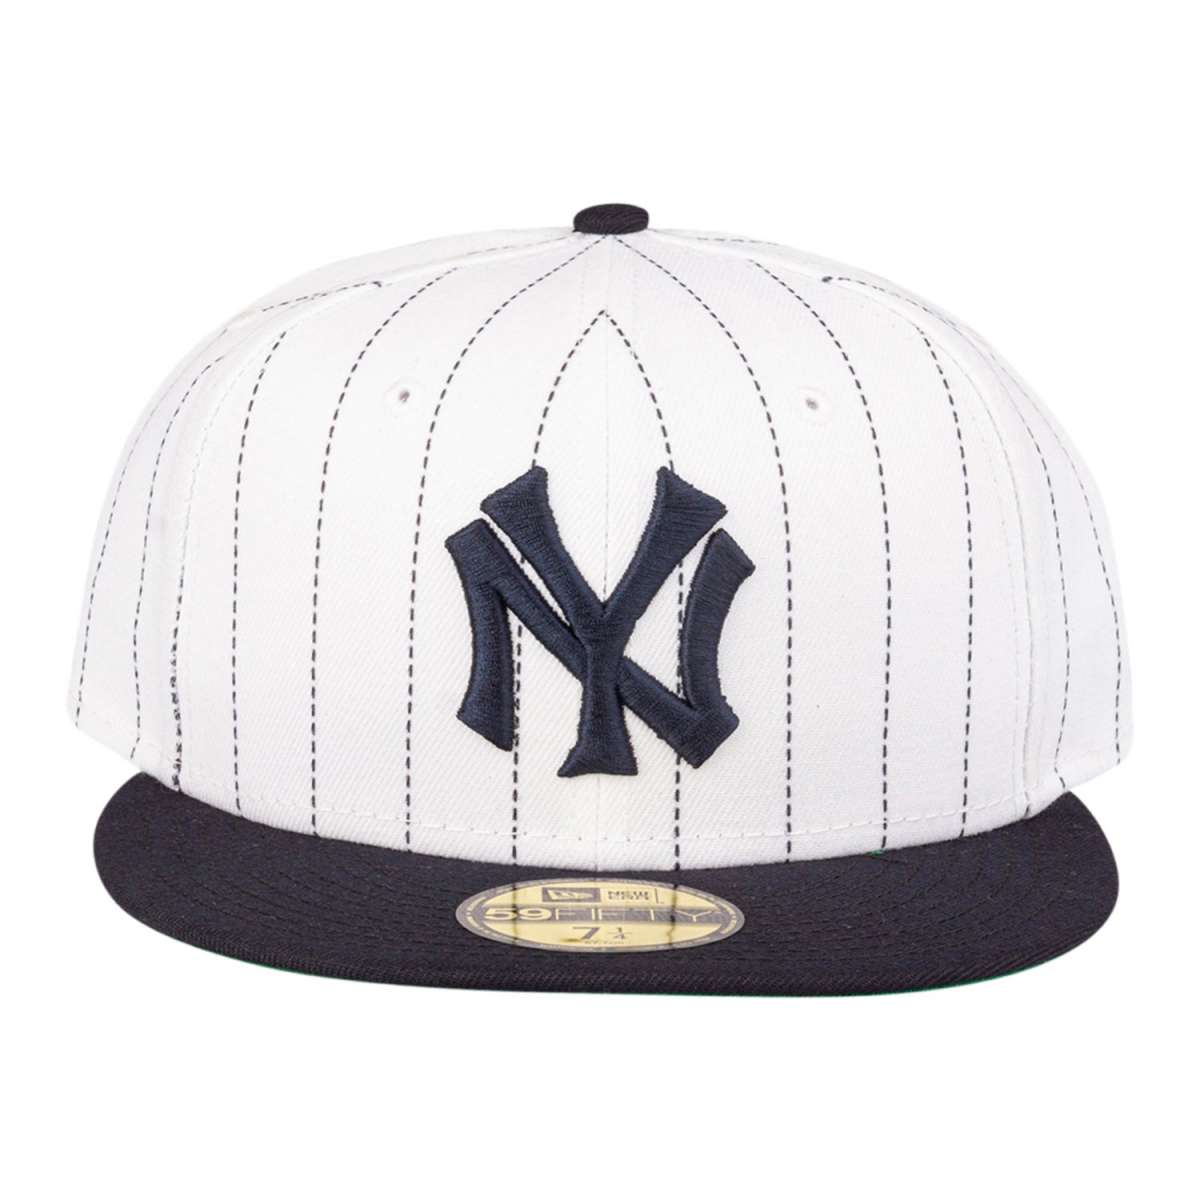 pinstriped hats